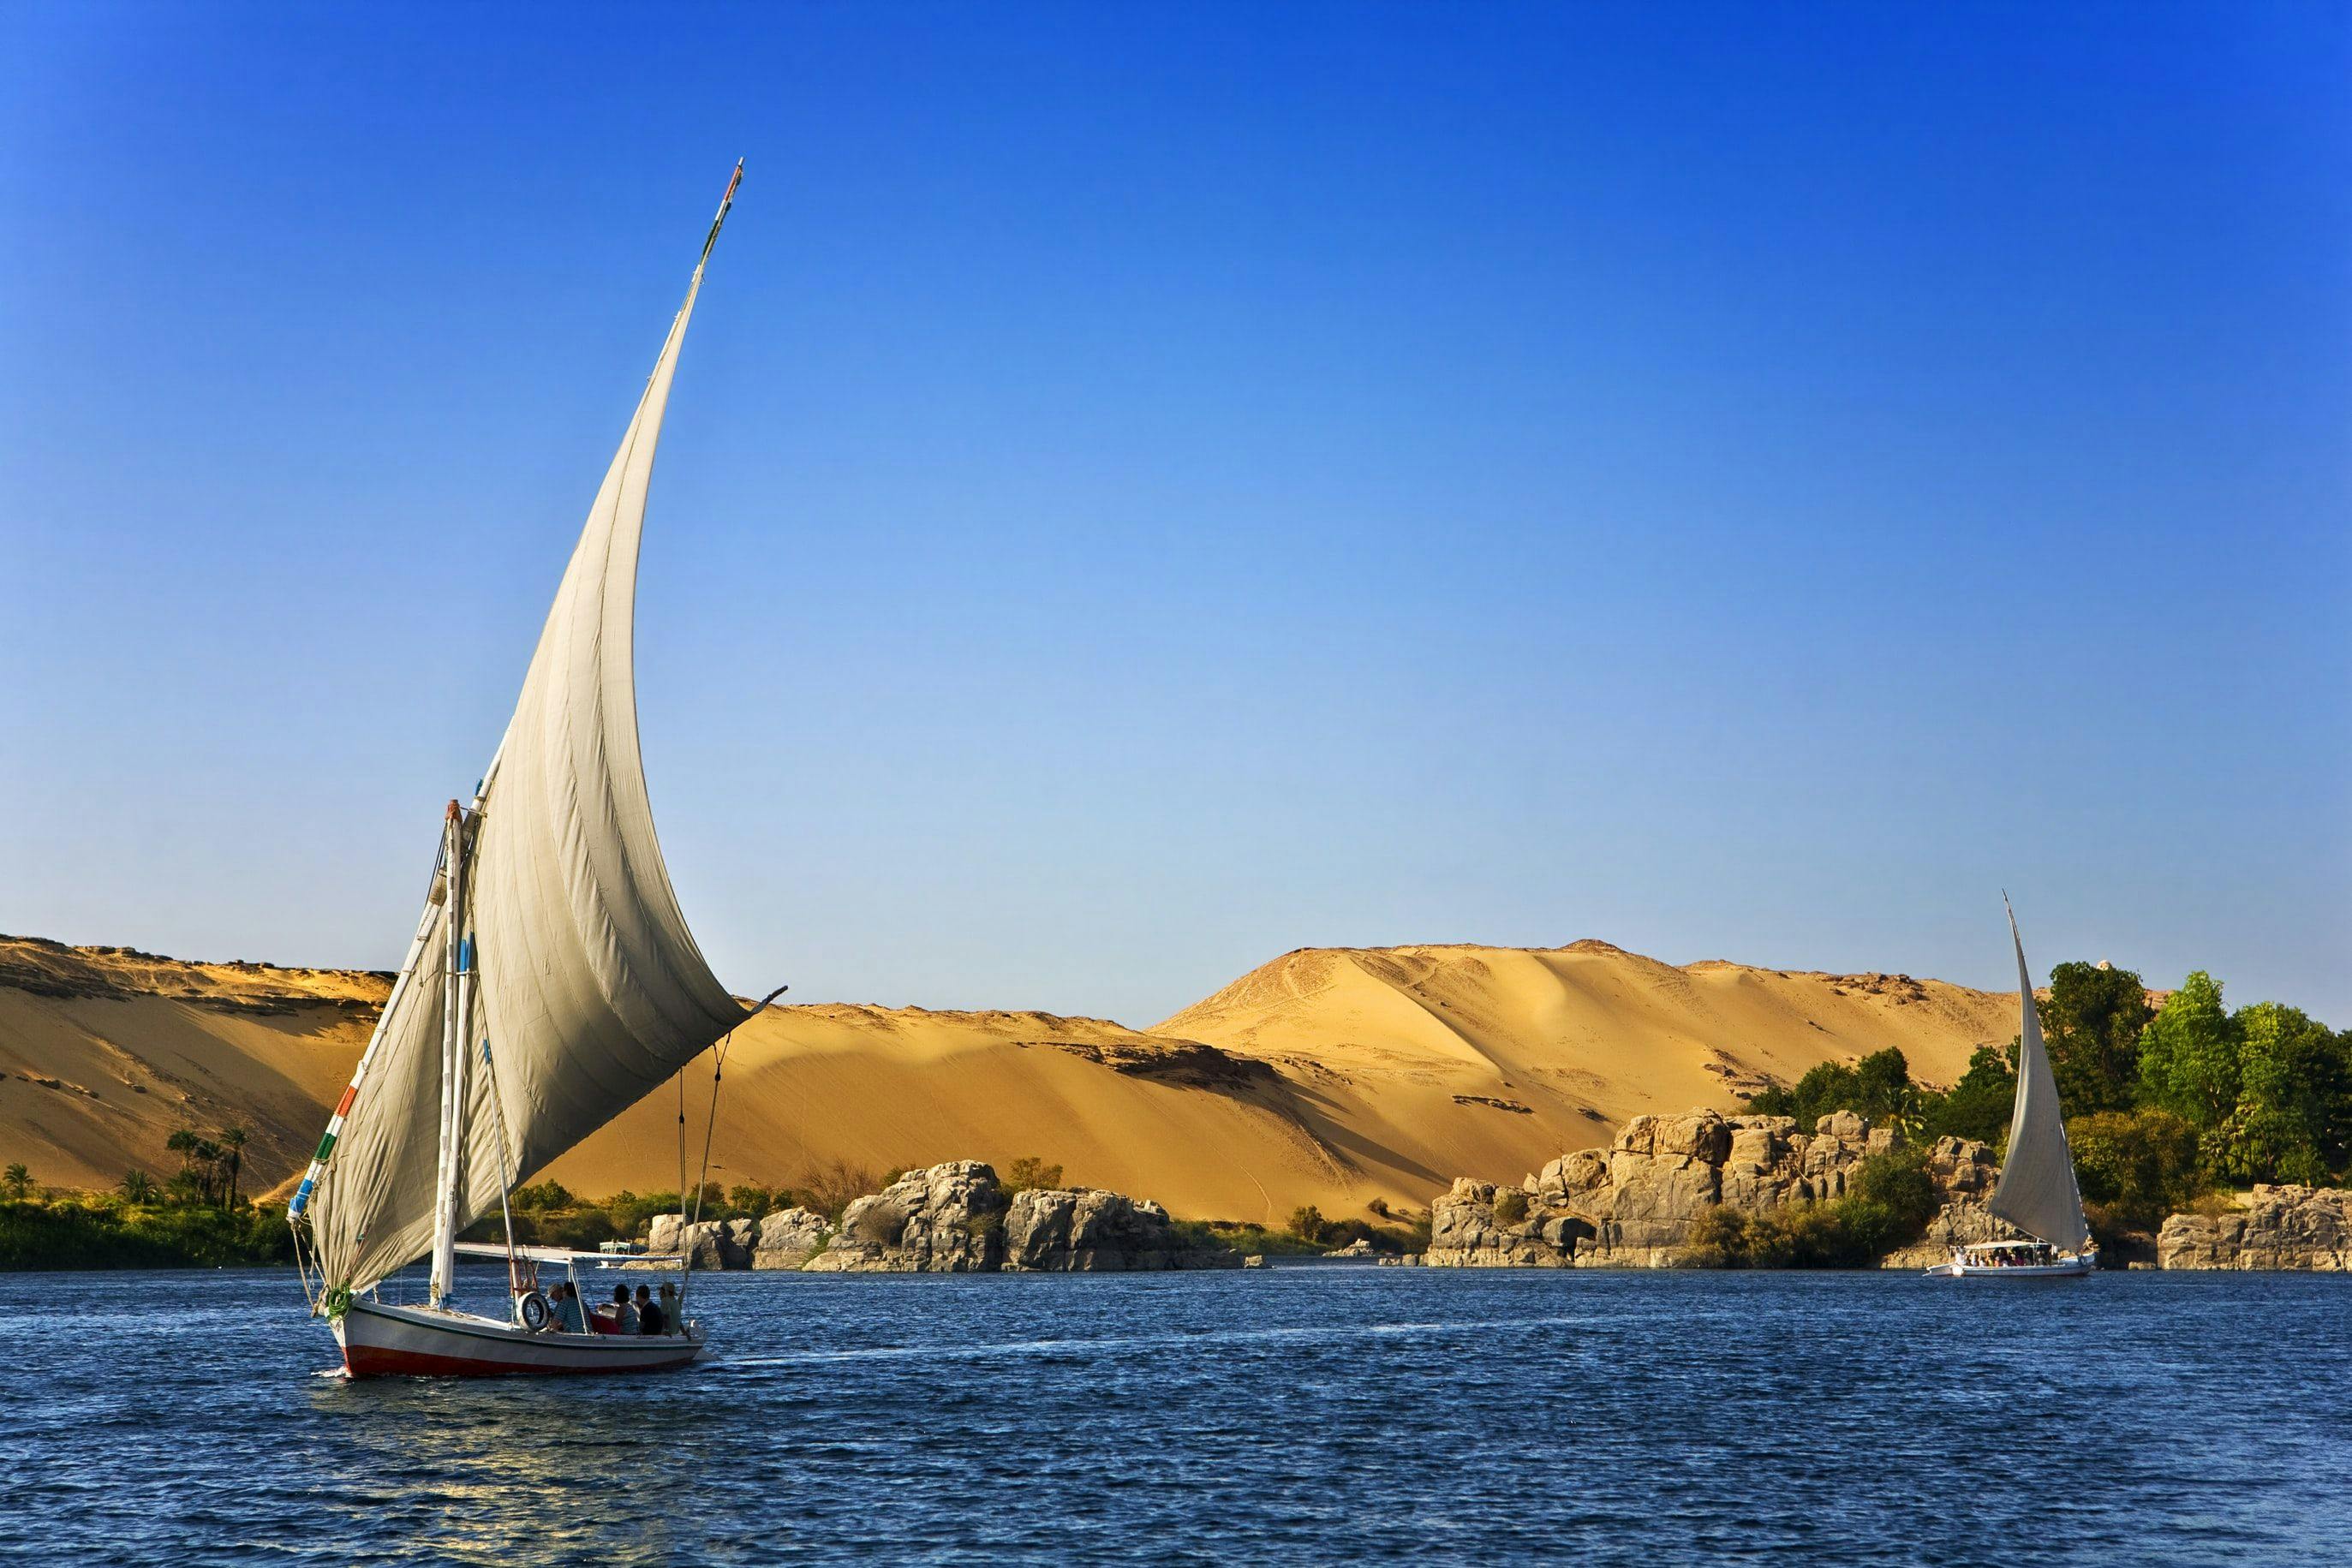 Unique boats on the ocean in Egypt. The orange desert sand can be seen in the background